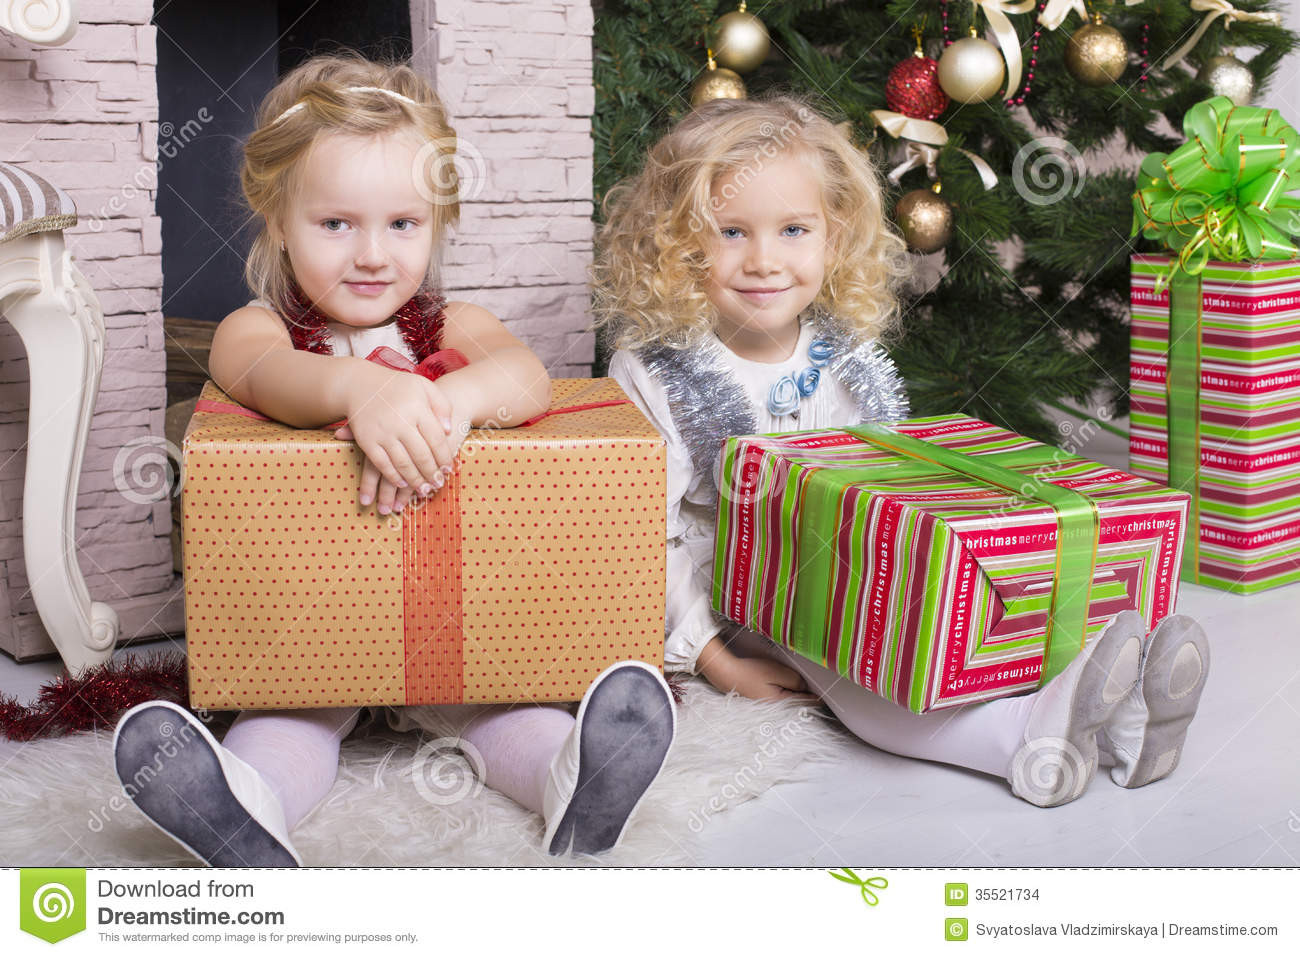 Funny Kids Gifts
 Funny Kids With Christmas Gift Stock Image of girl